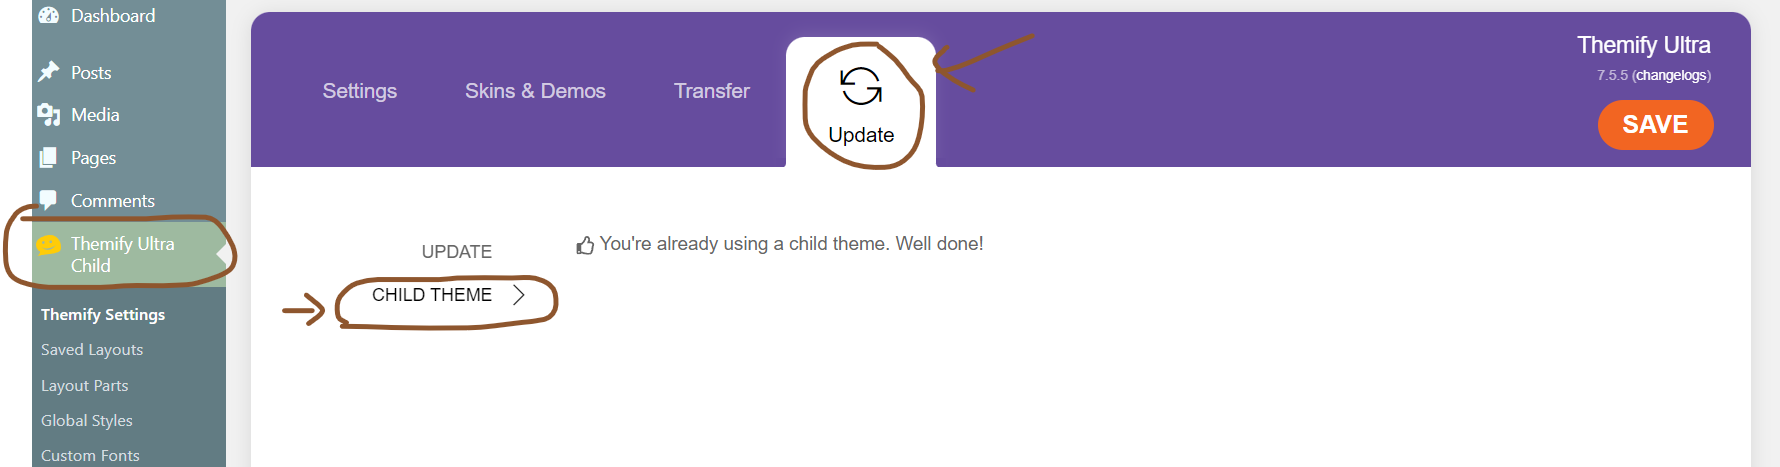 install themify ultra child theme